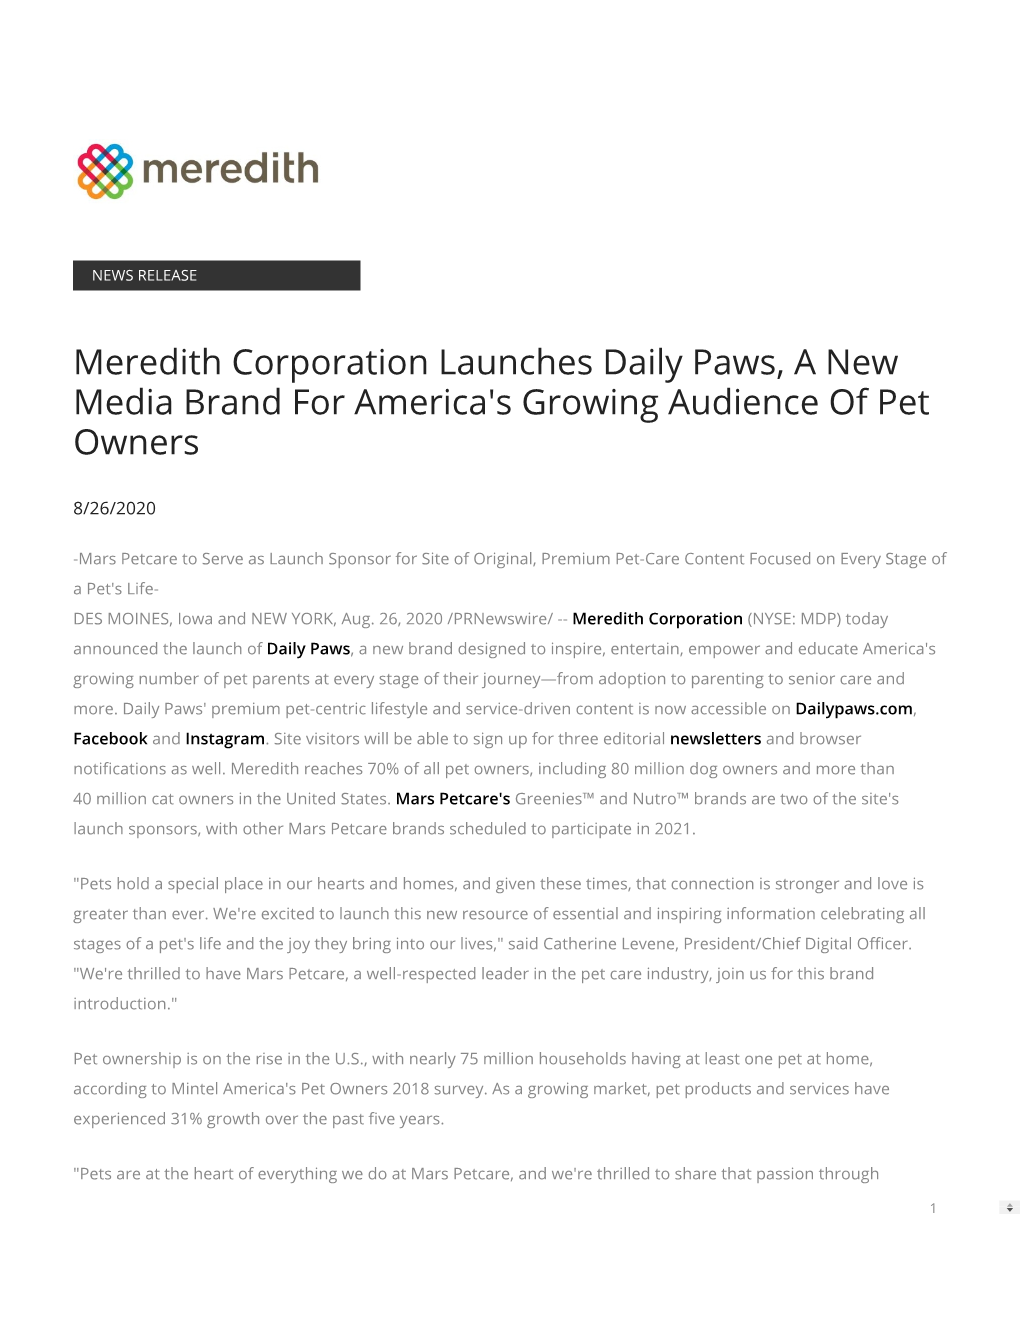 Meredith Corporation Launches Daily Paws, a New Media Brand for America's Growing Audience of Pet Owners